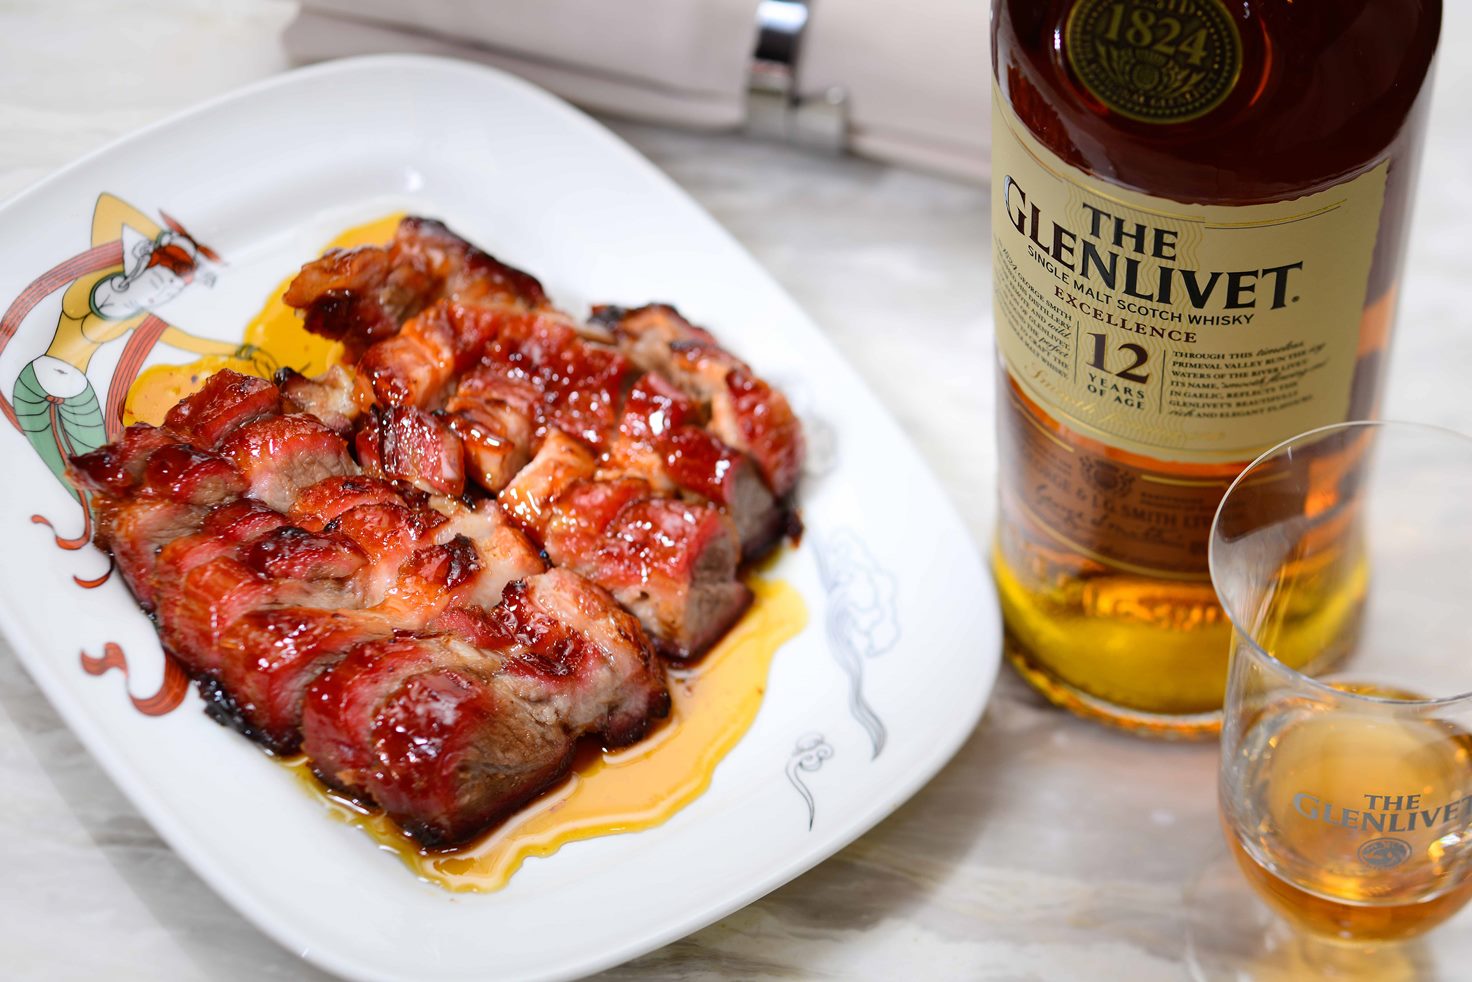 Dynasty Whisky Pairing Suggestion - Barbecued Pork